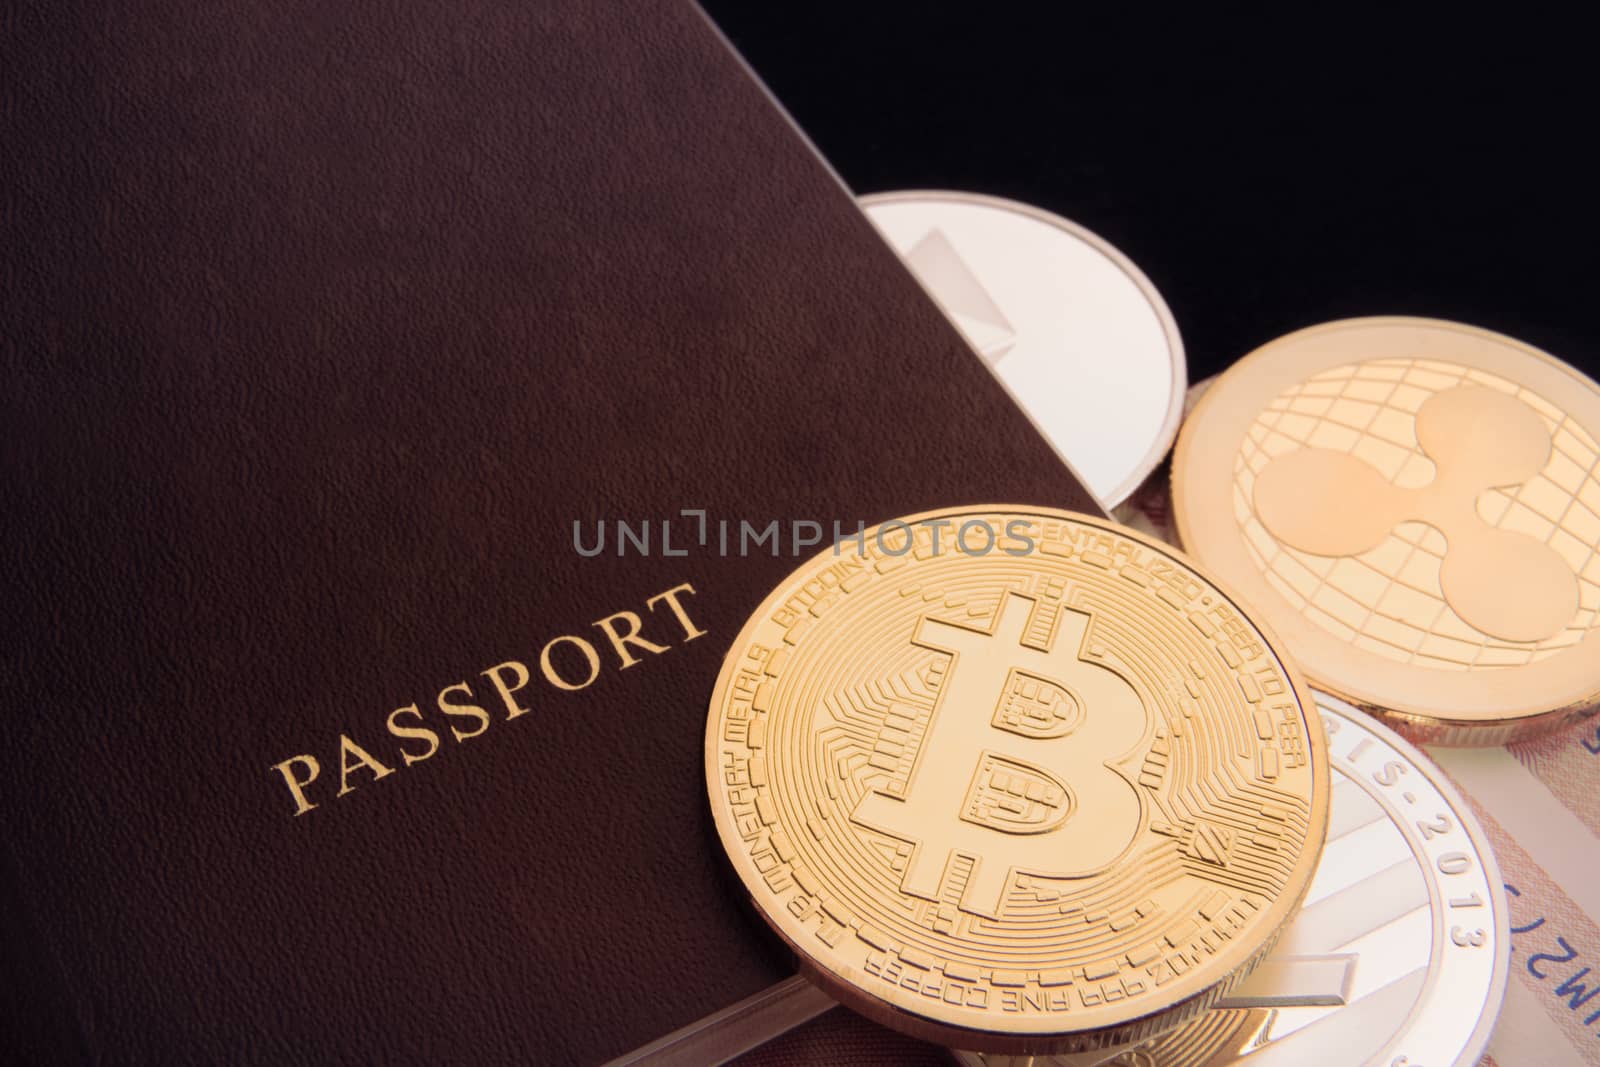 cryptocurrency bitcoin coin and passport, btc, bitcoin, ethereum by psodaz